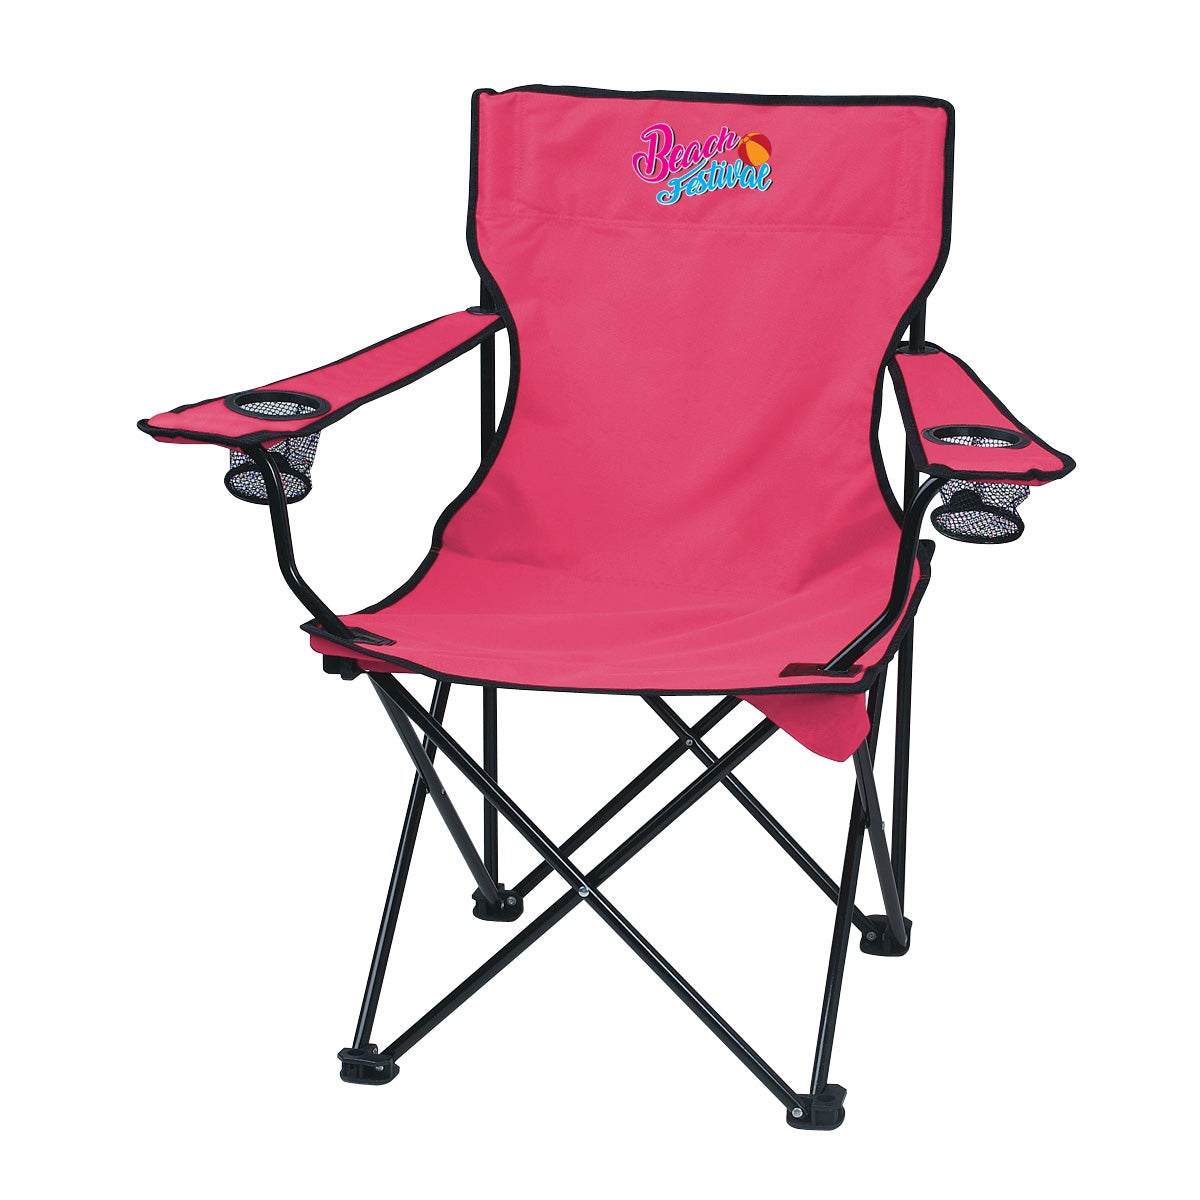 Folding Chair with Carrying Bag Chairs Hit Promo Pink Single Color 